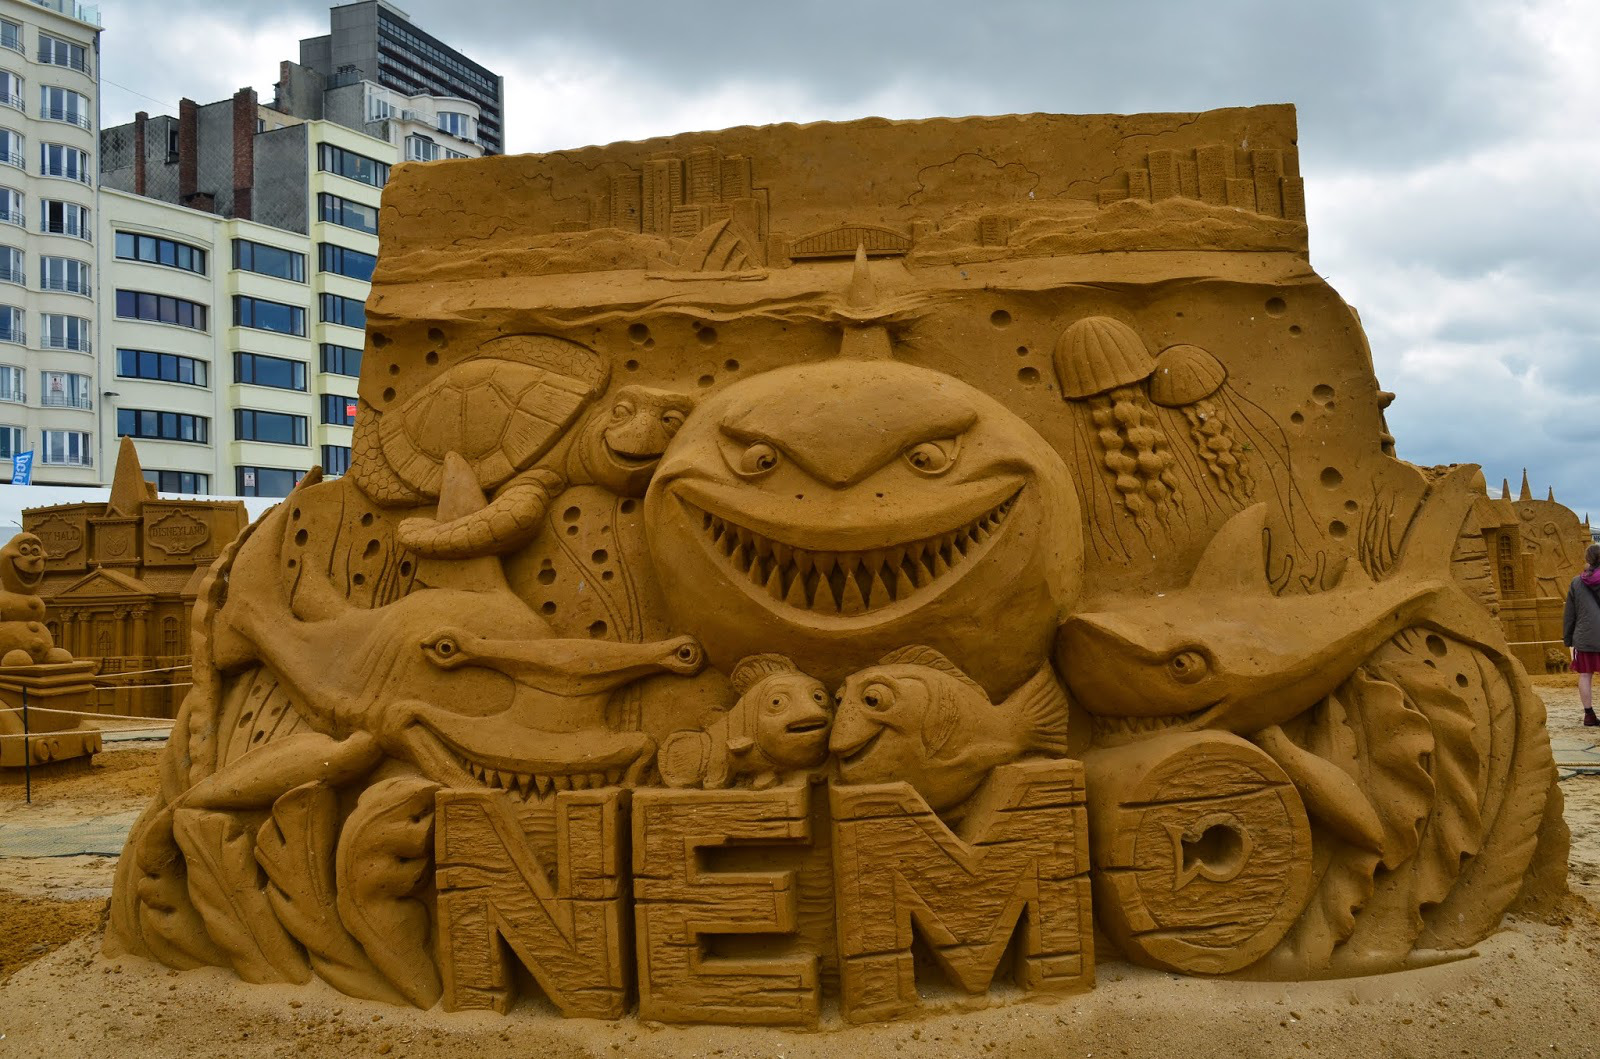 Let These Pixar Sand Sculptures Inspire You — For The Love of Pixar